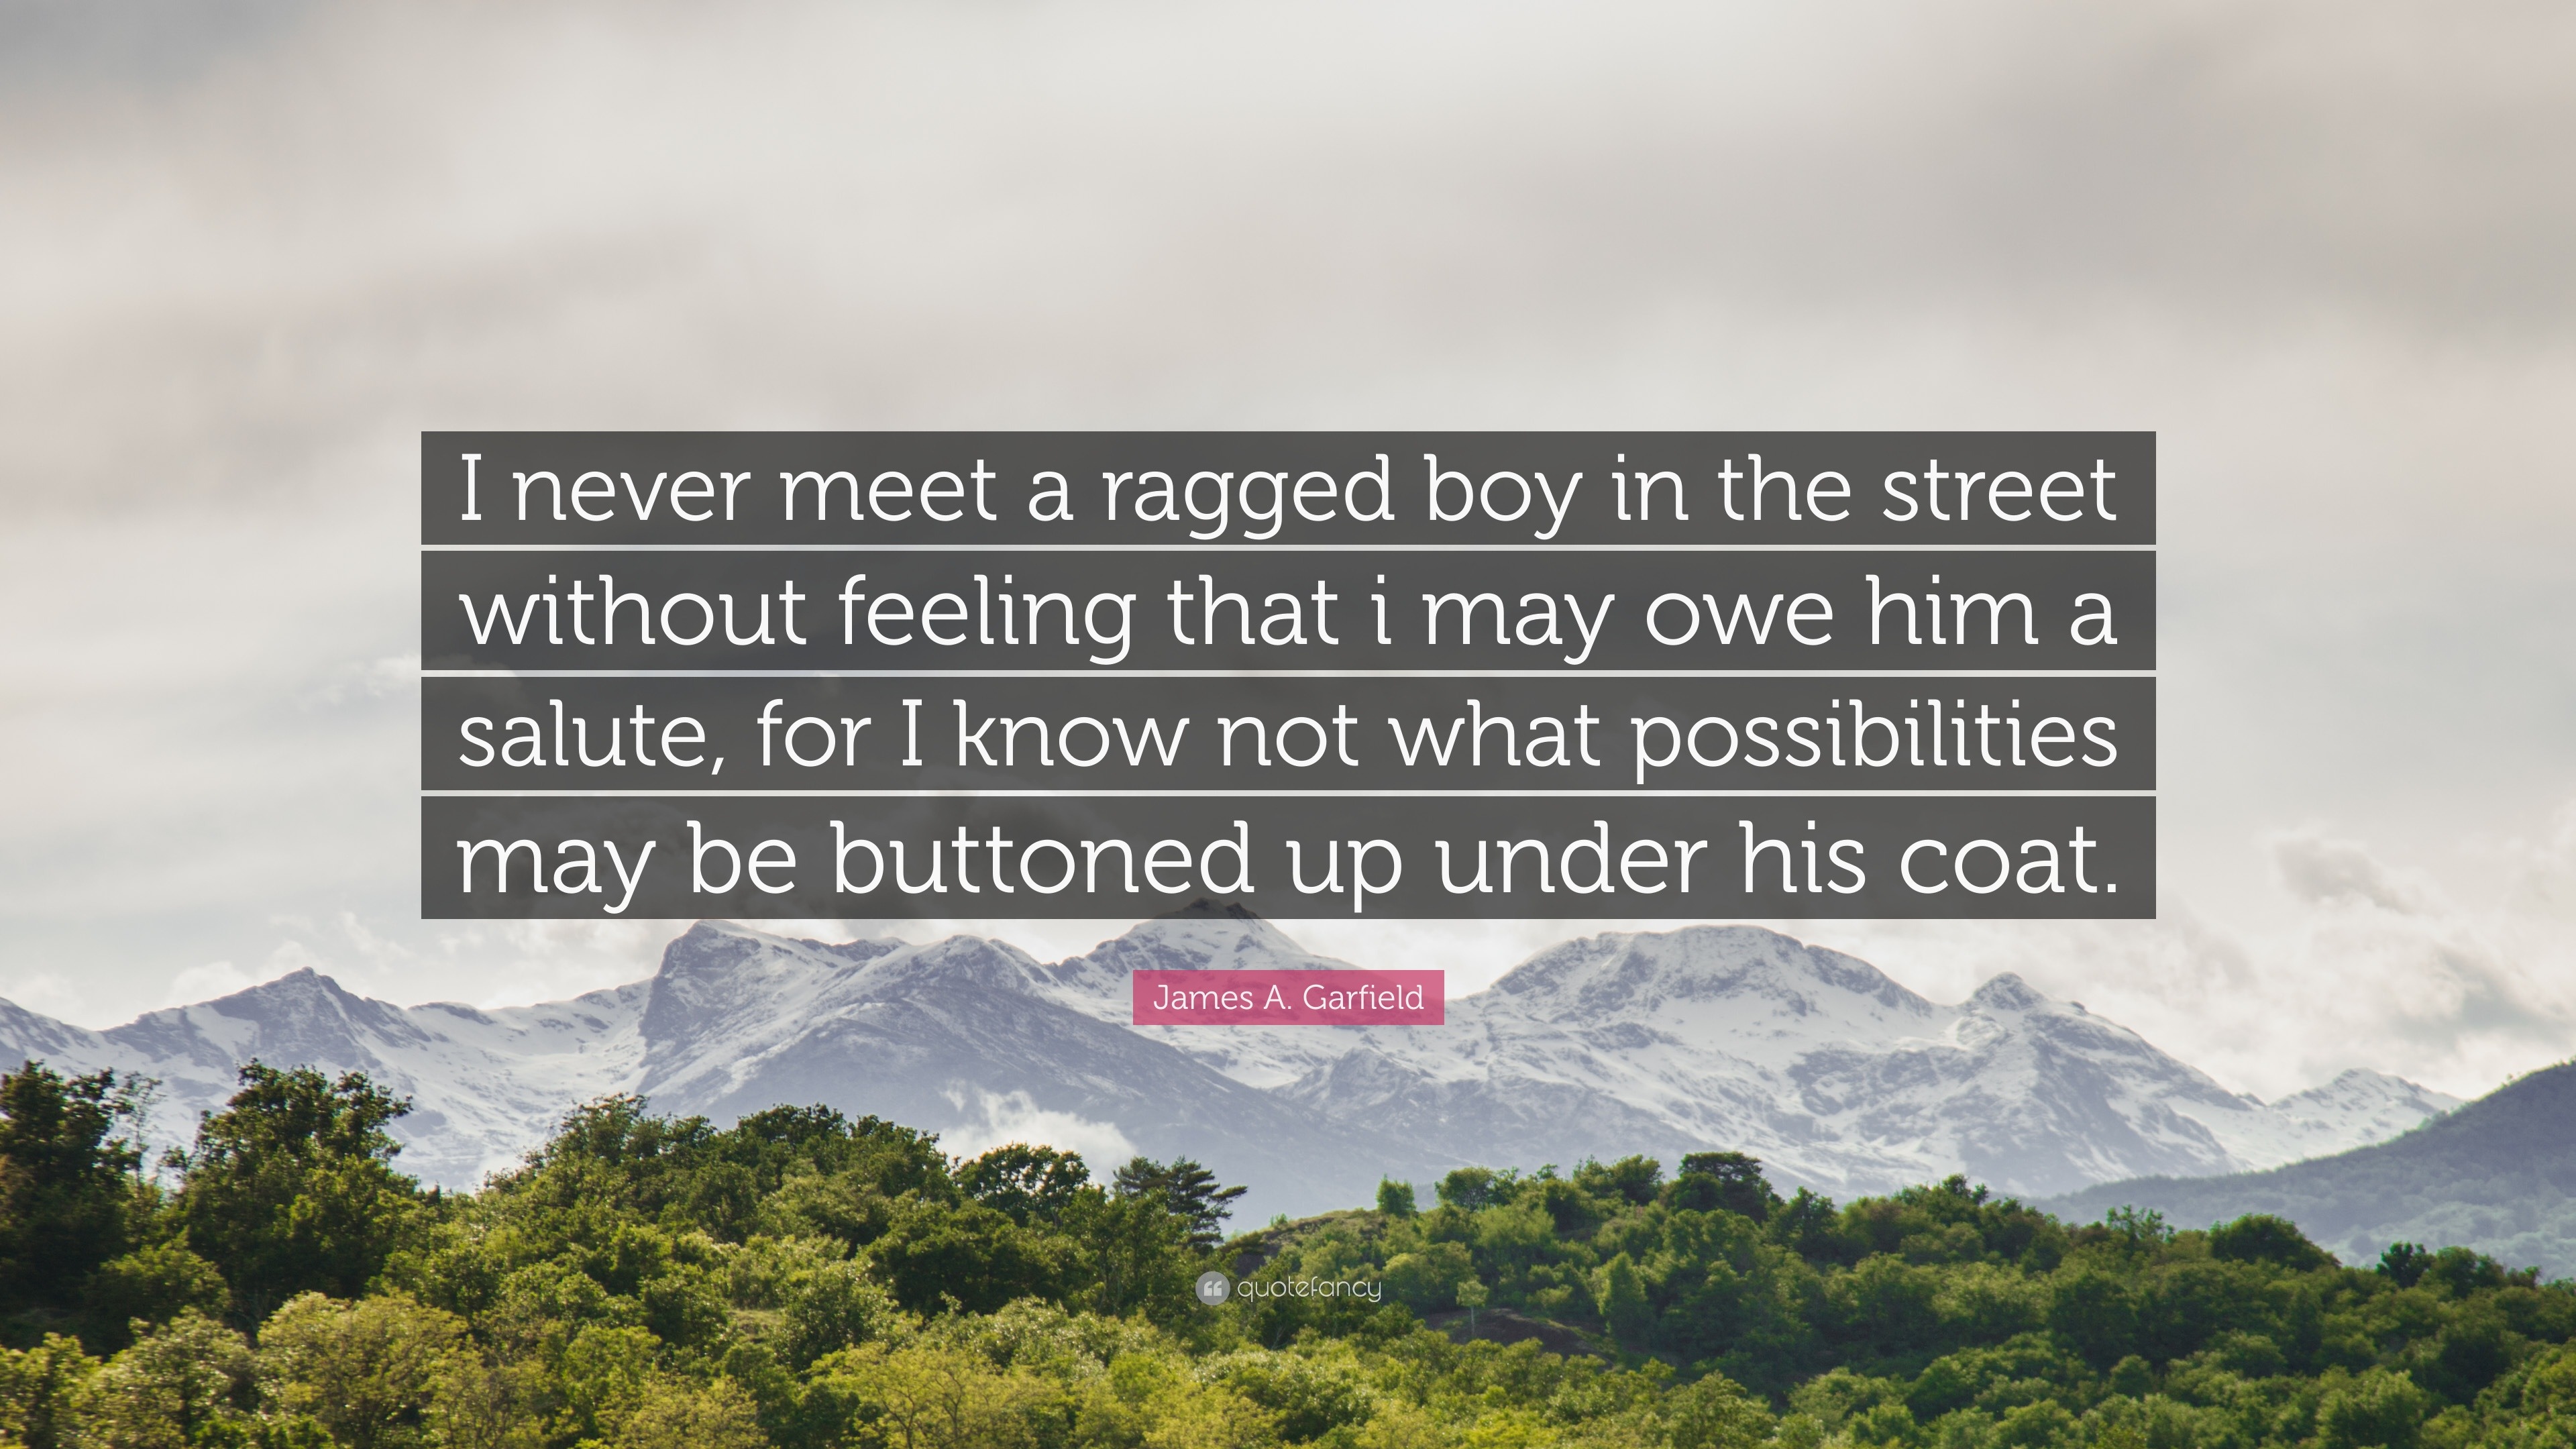 James A. Garfield Quote: “I never meet a ragged boy in the street without feeling that i may owe him a salute, for I know not what possibilities m...”